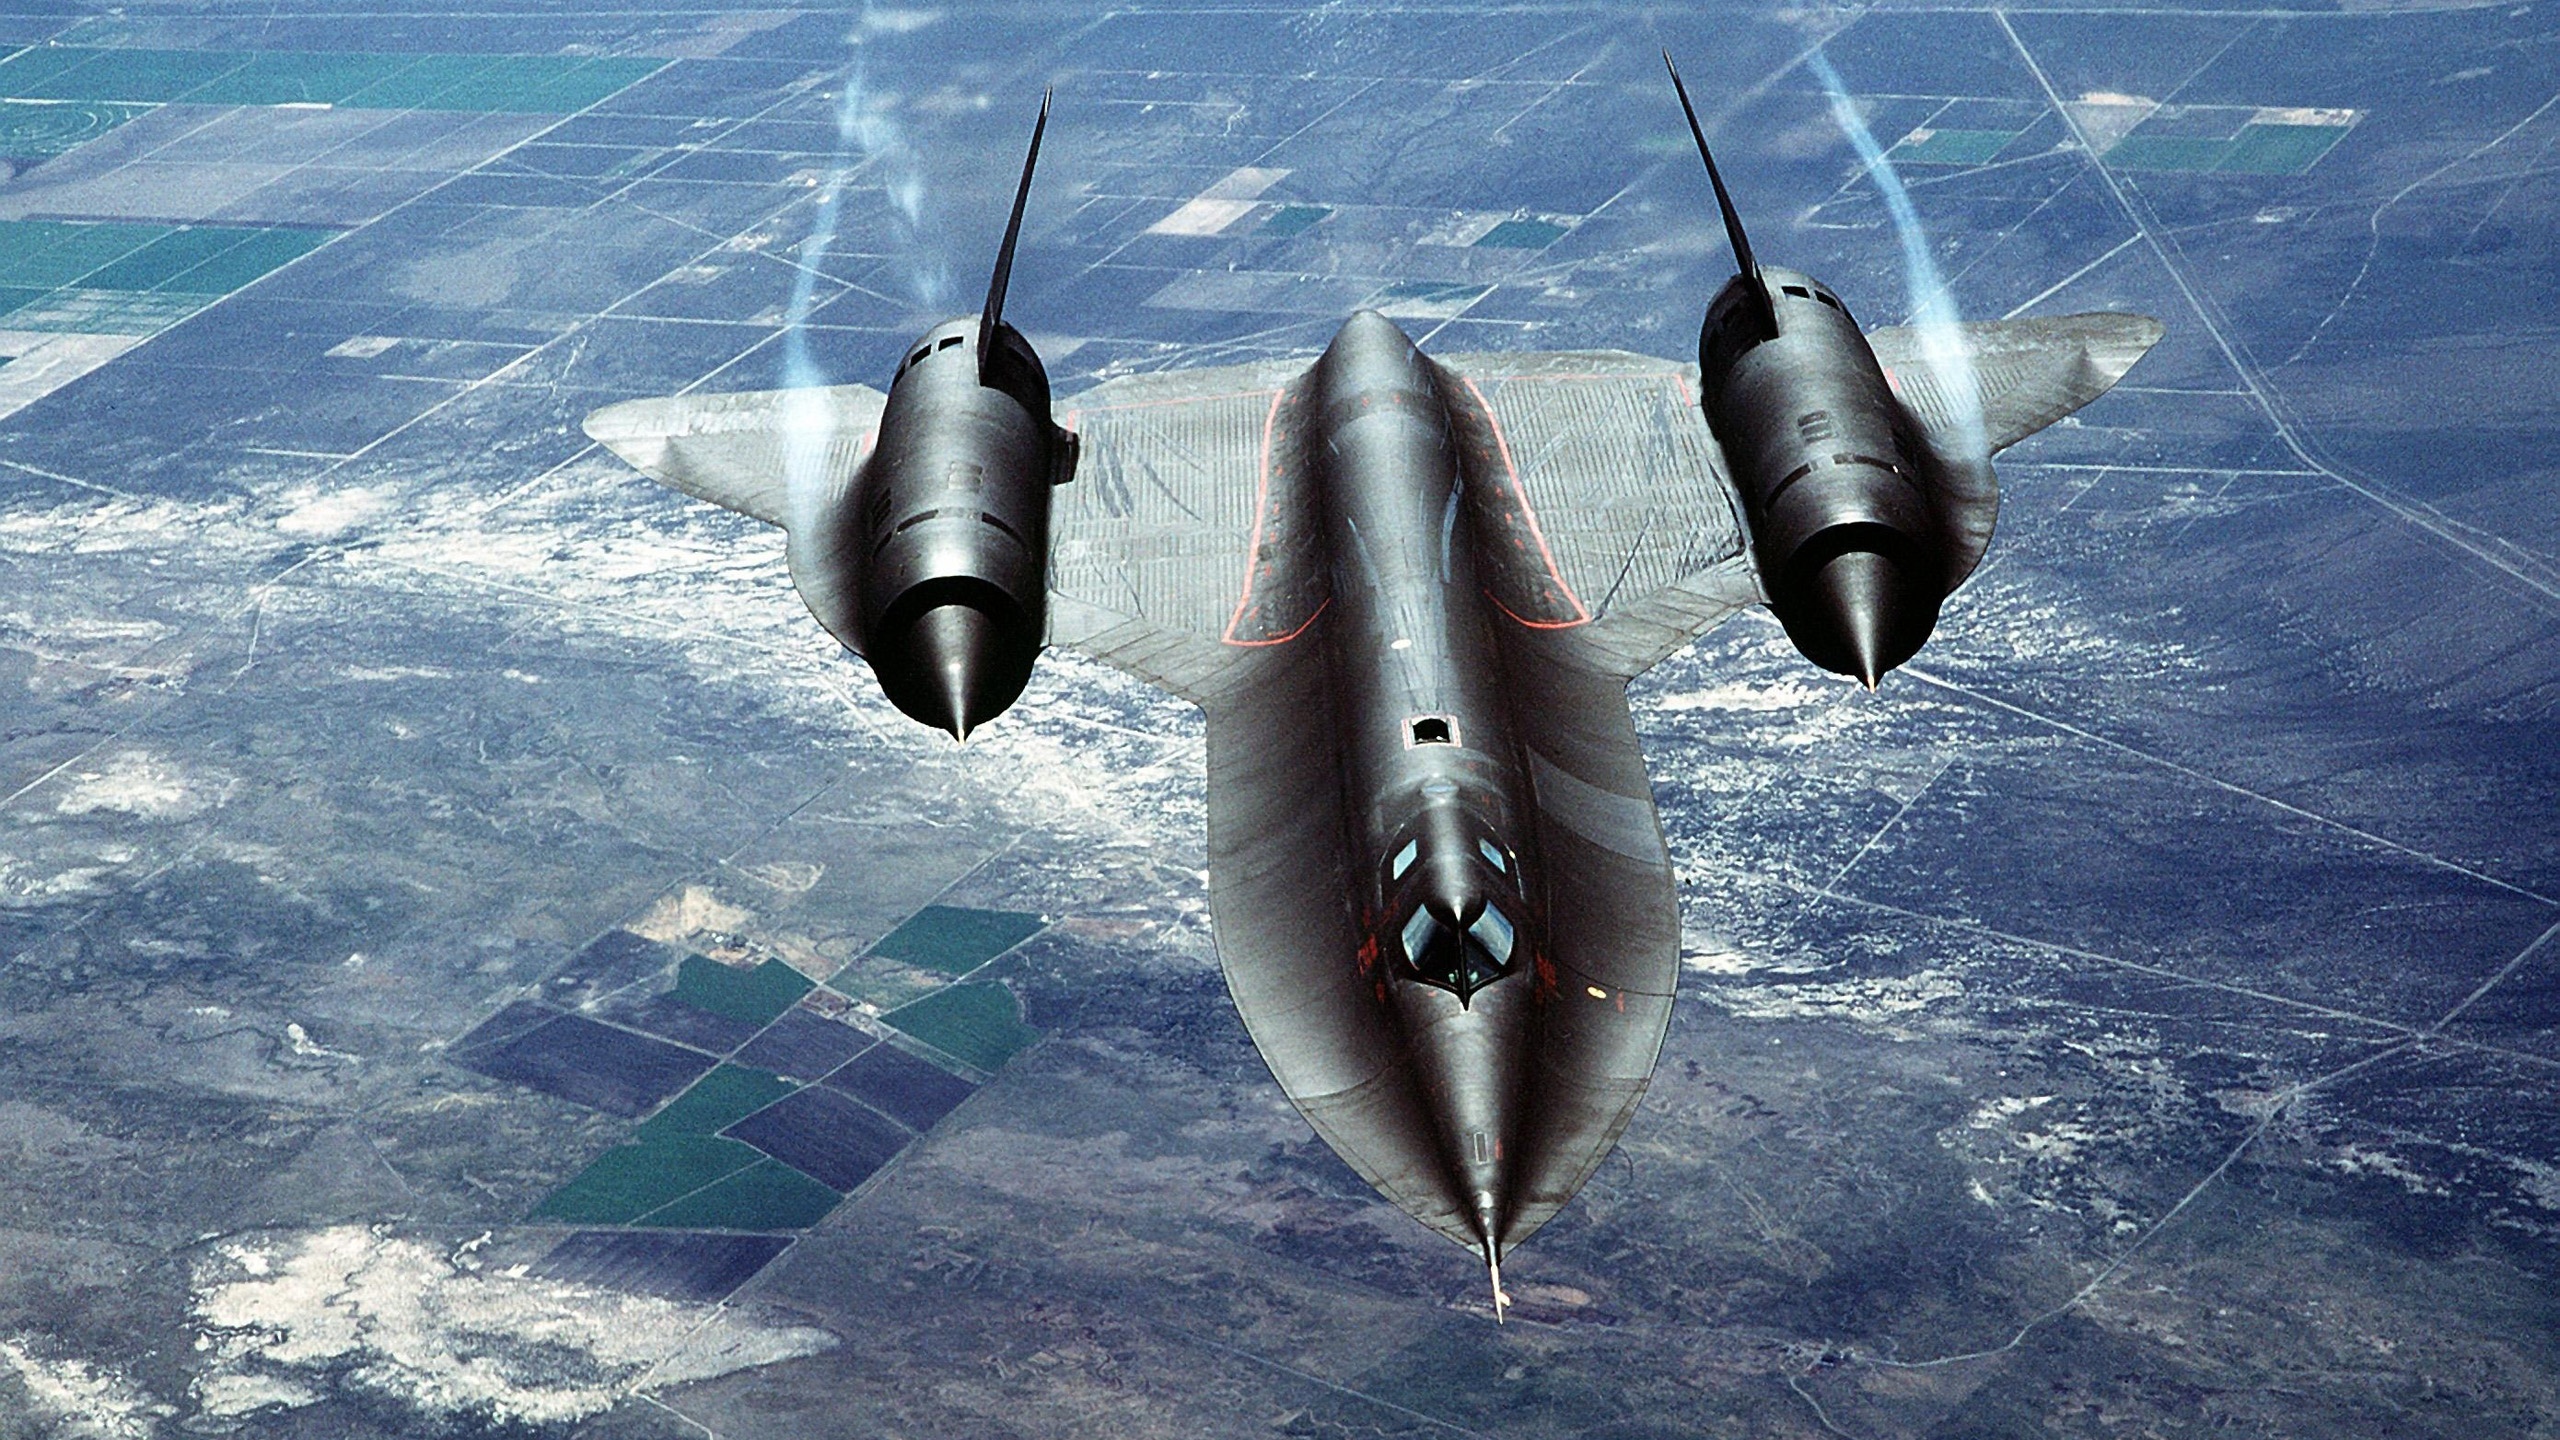 Sr 71 In Flight - Coolest Airplanes , HD Wallpaper & Backgrounds